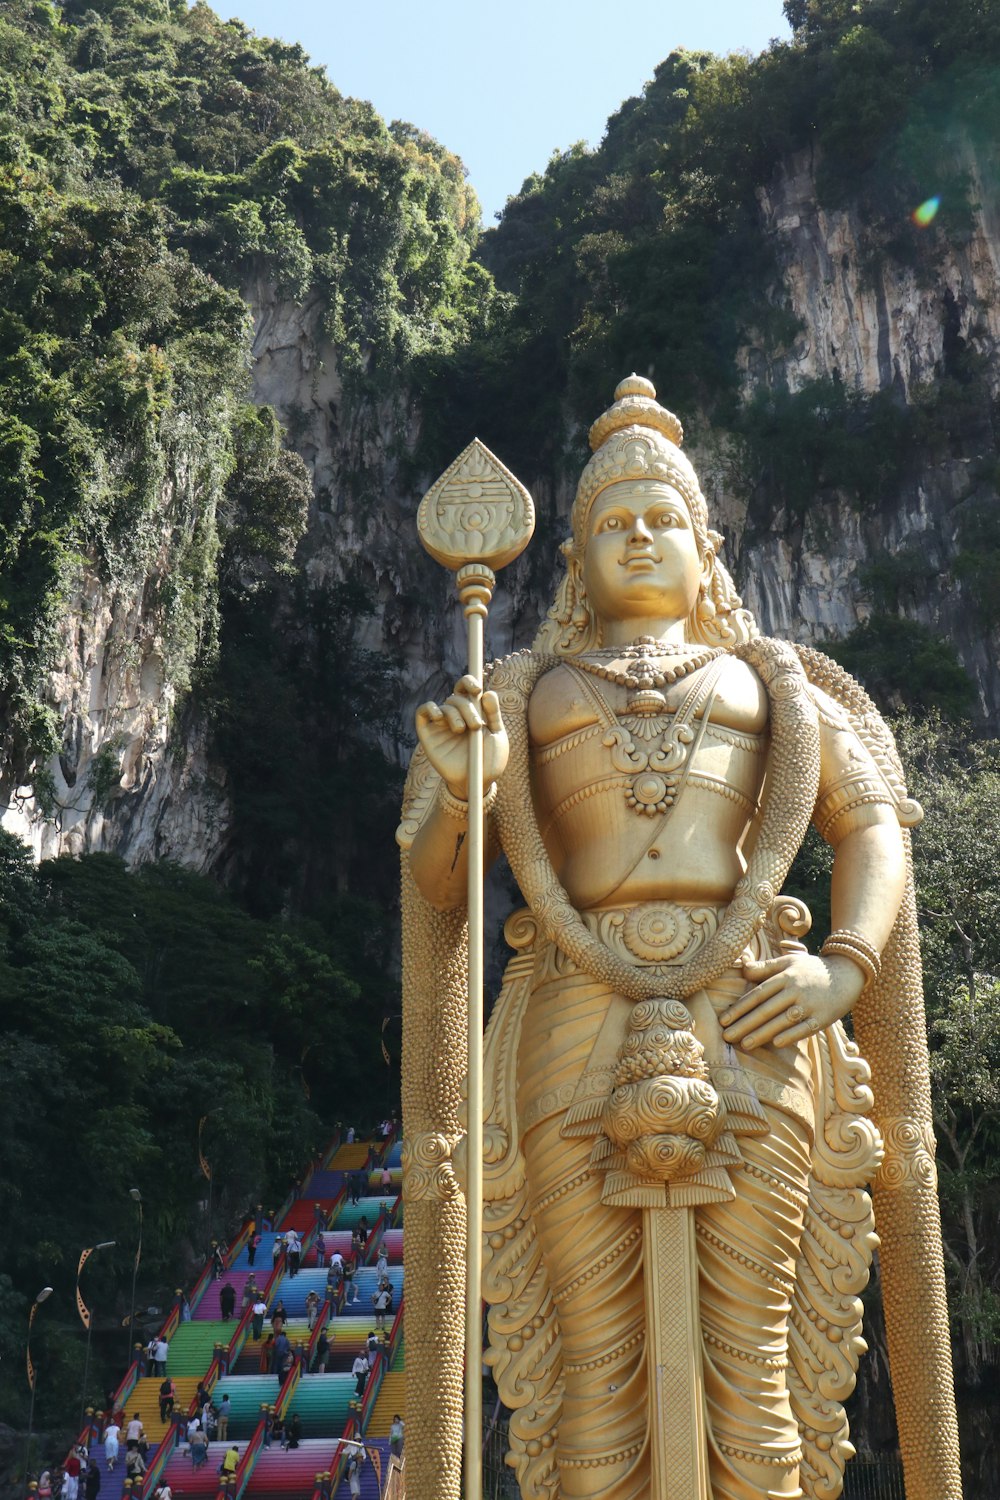 a statue of a man holding a spear in front of a mountain